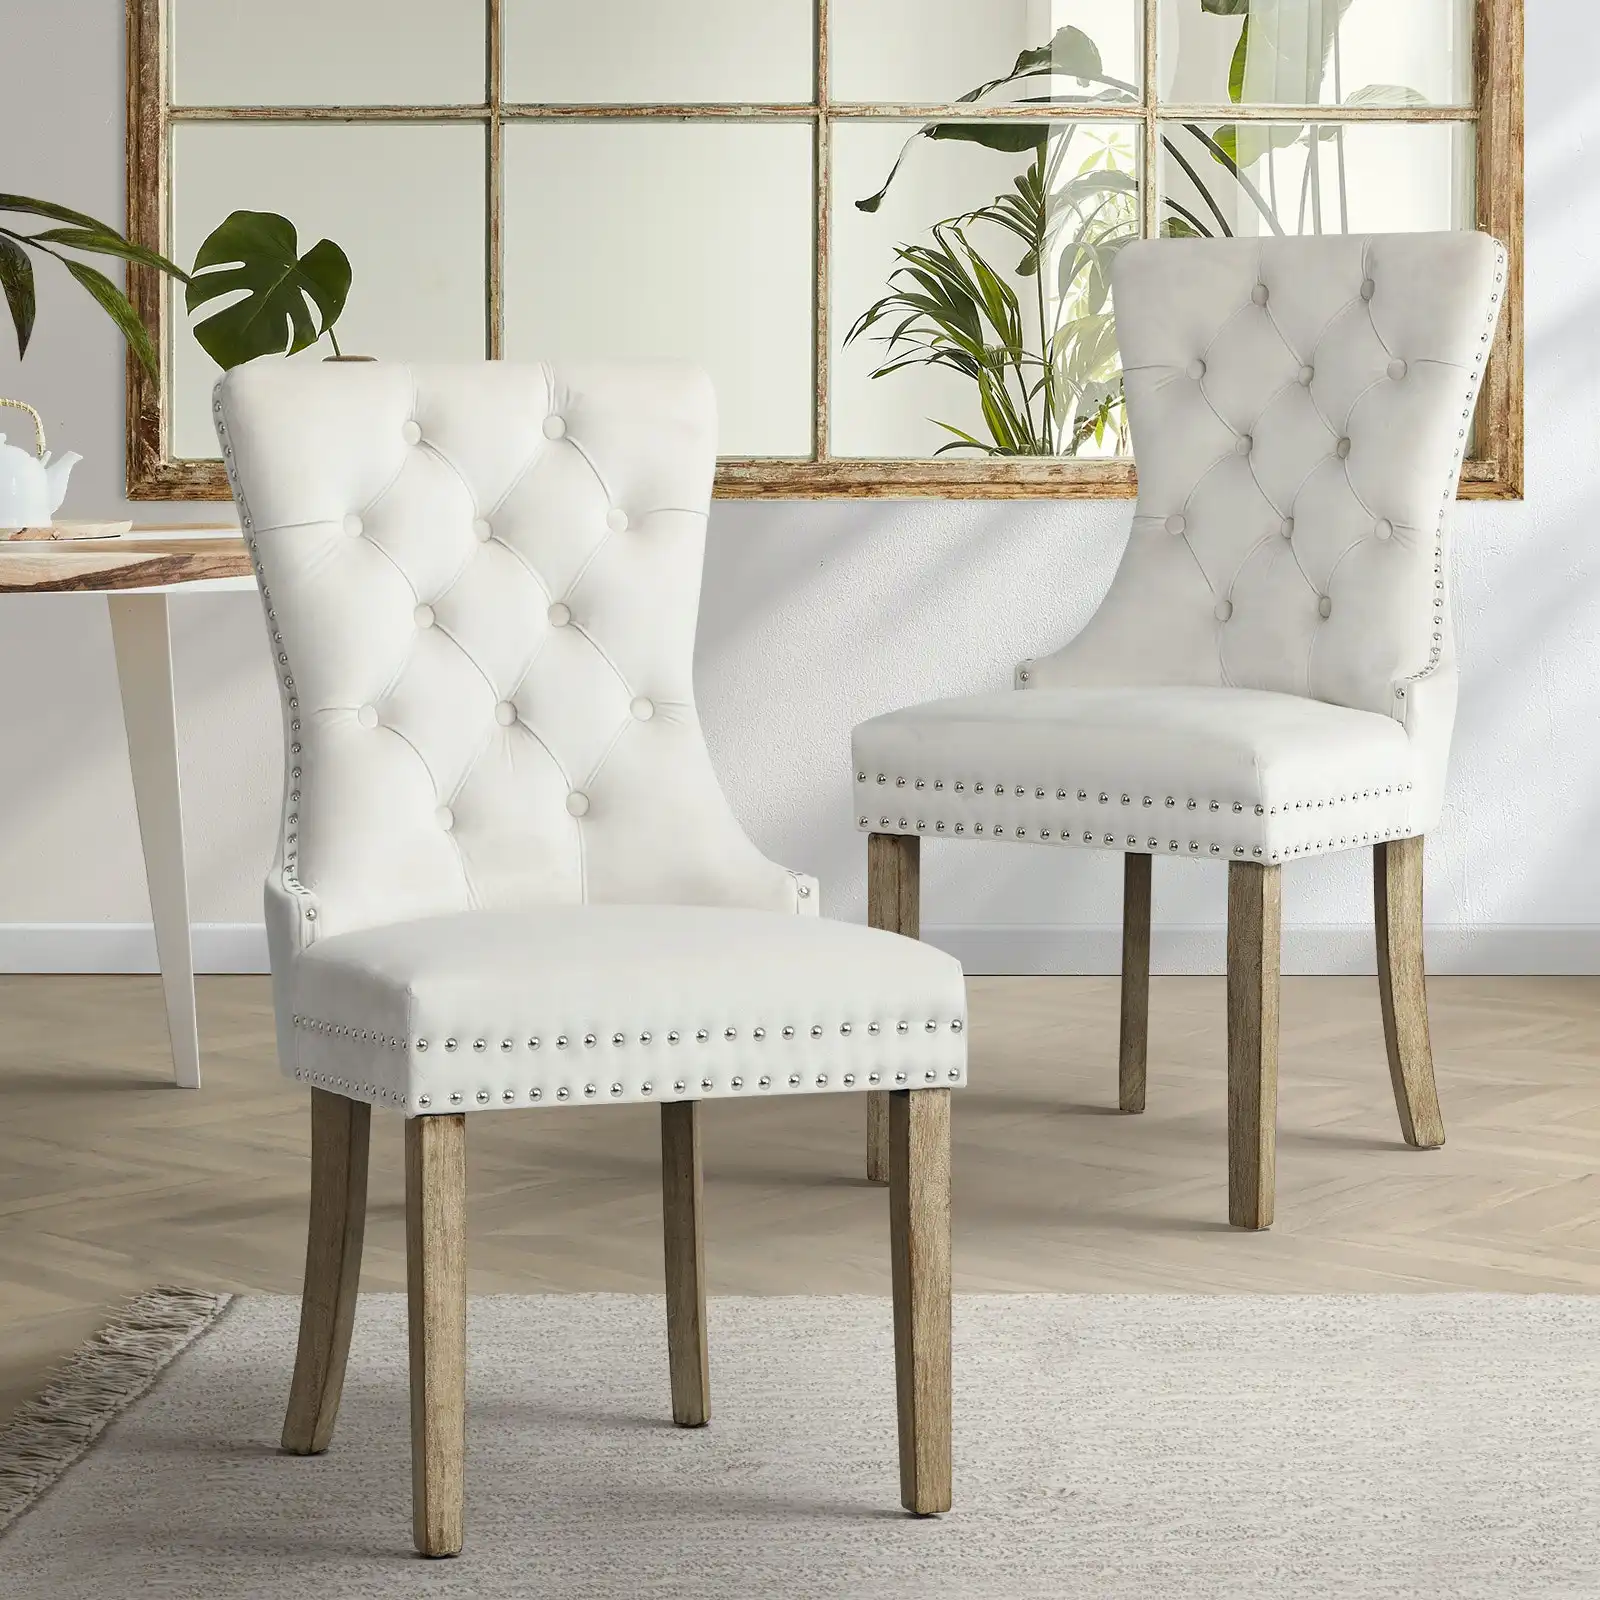 Oikiture 2x Velvet Dining Chairs Upholstered French Provincial Tufted Beige